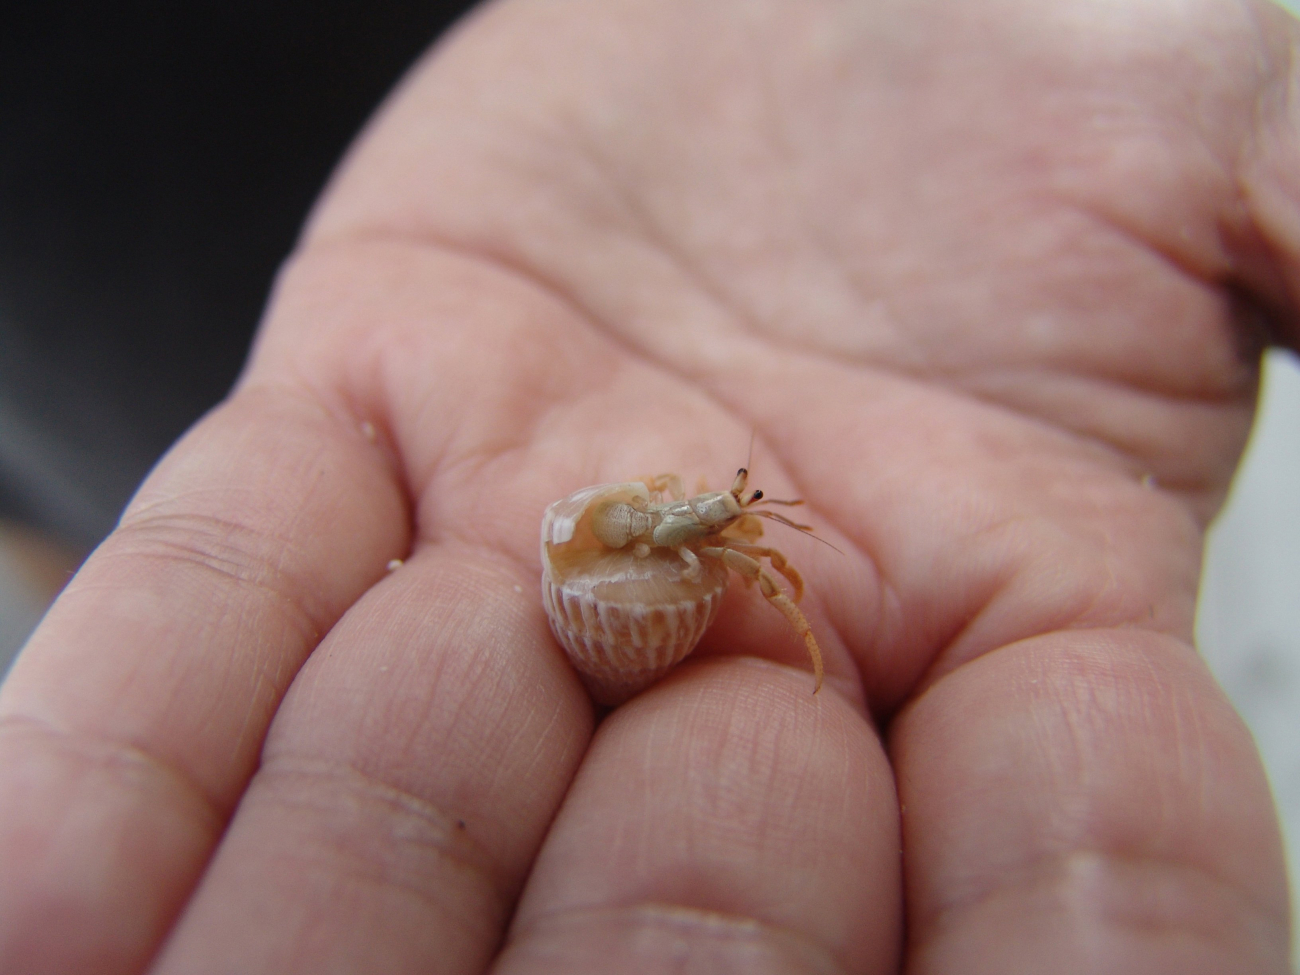 A hermit crab found at the steps of the Little Cayman Research Center